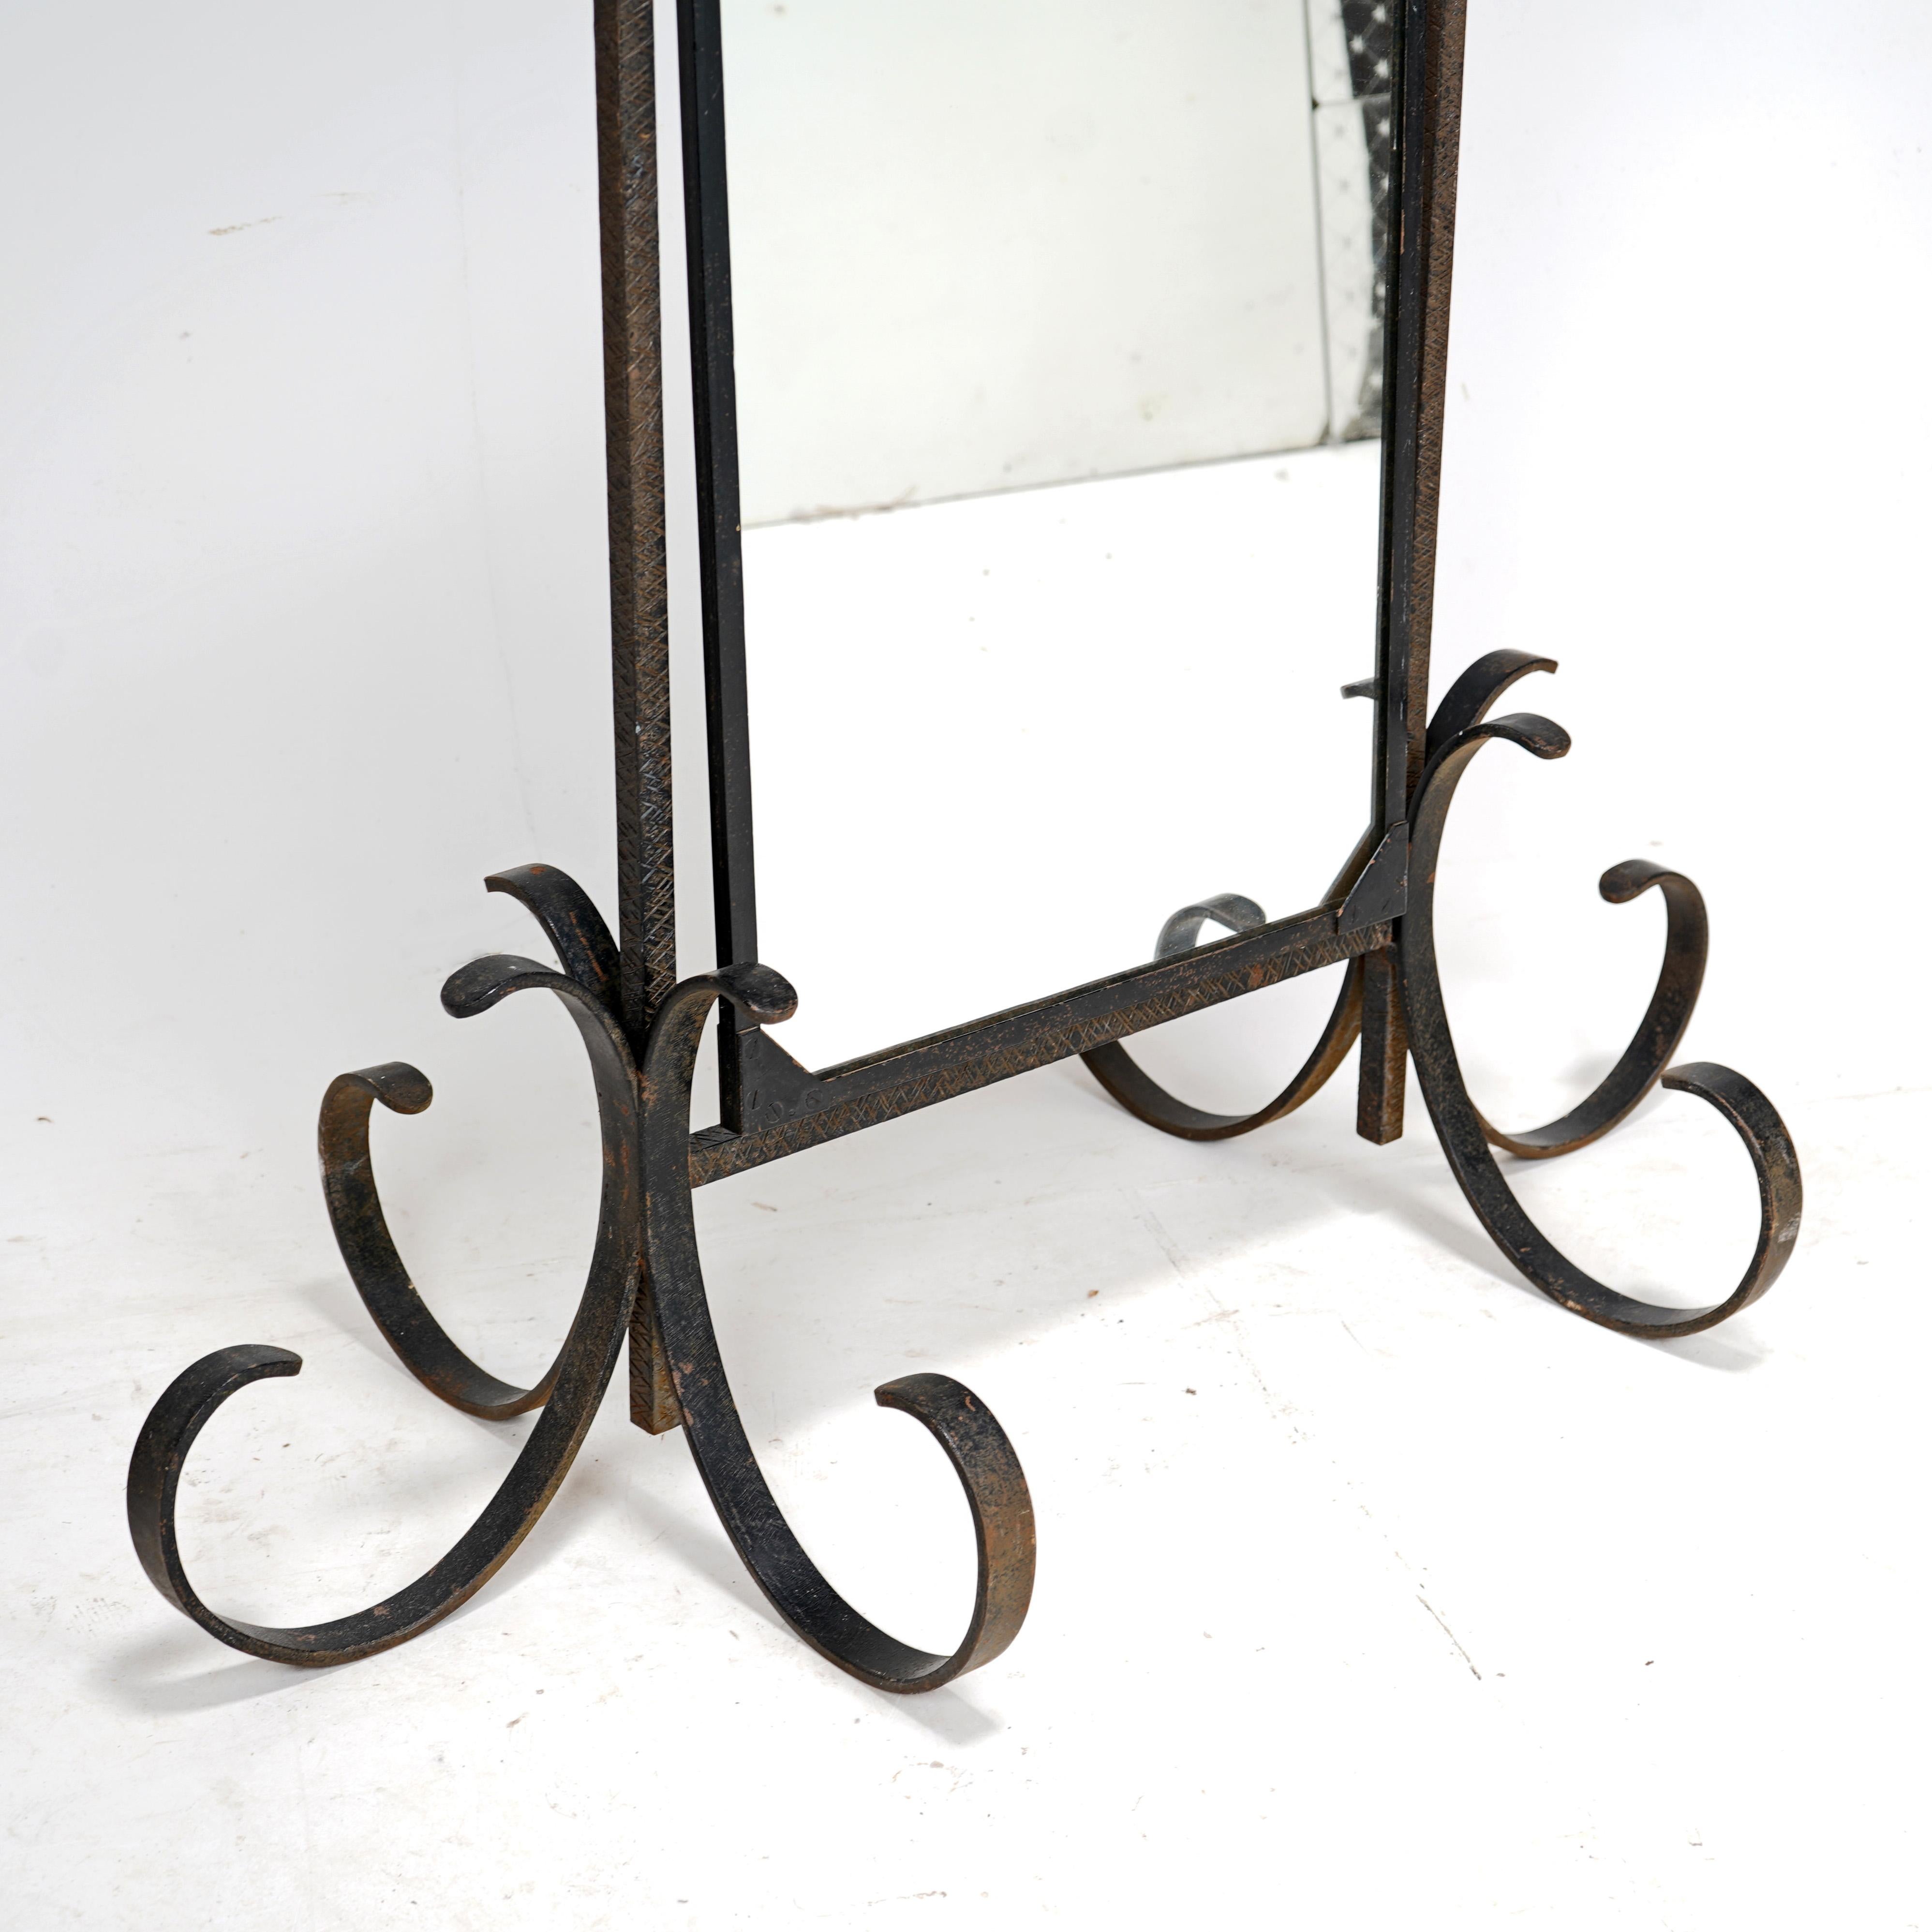  A very striking iron cheval mirror, French circa 1950s.
A well made piece with scored wrought iron bars on spiralling steel feet. The brass knobs on the side twist and tighten, holding the mirror firm in the desired position.
A unique piece that